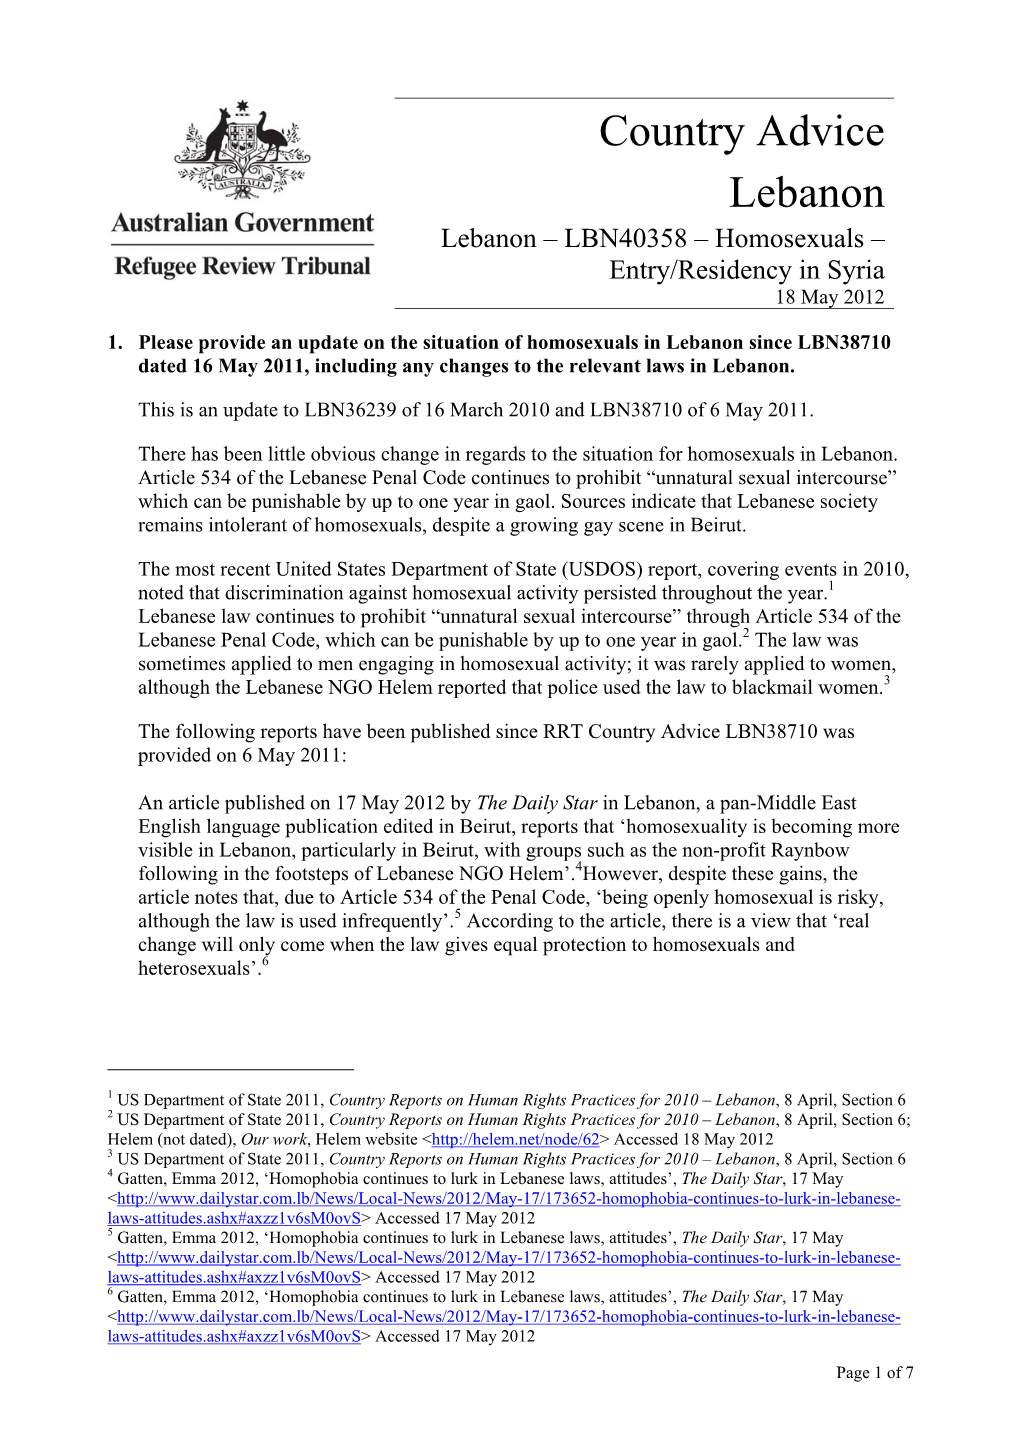 Lebanon – LBN40358 – Homosexuals – Entry/Residency in Syria 18 May 2012